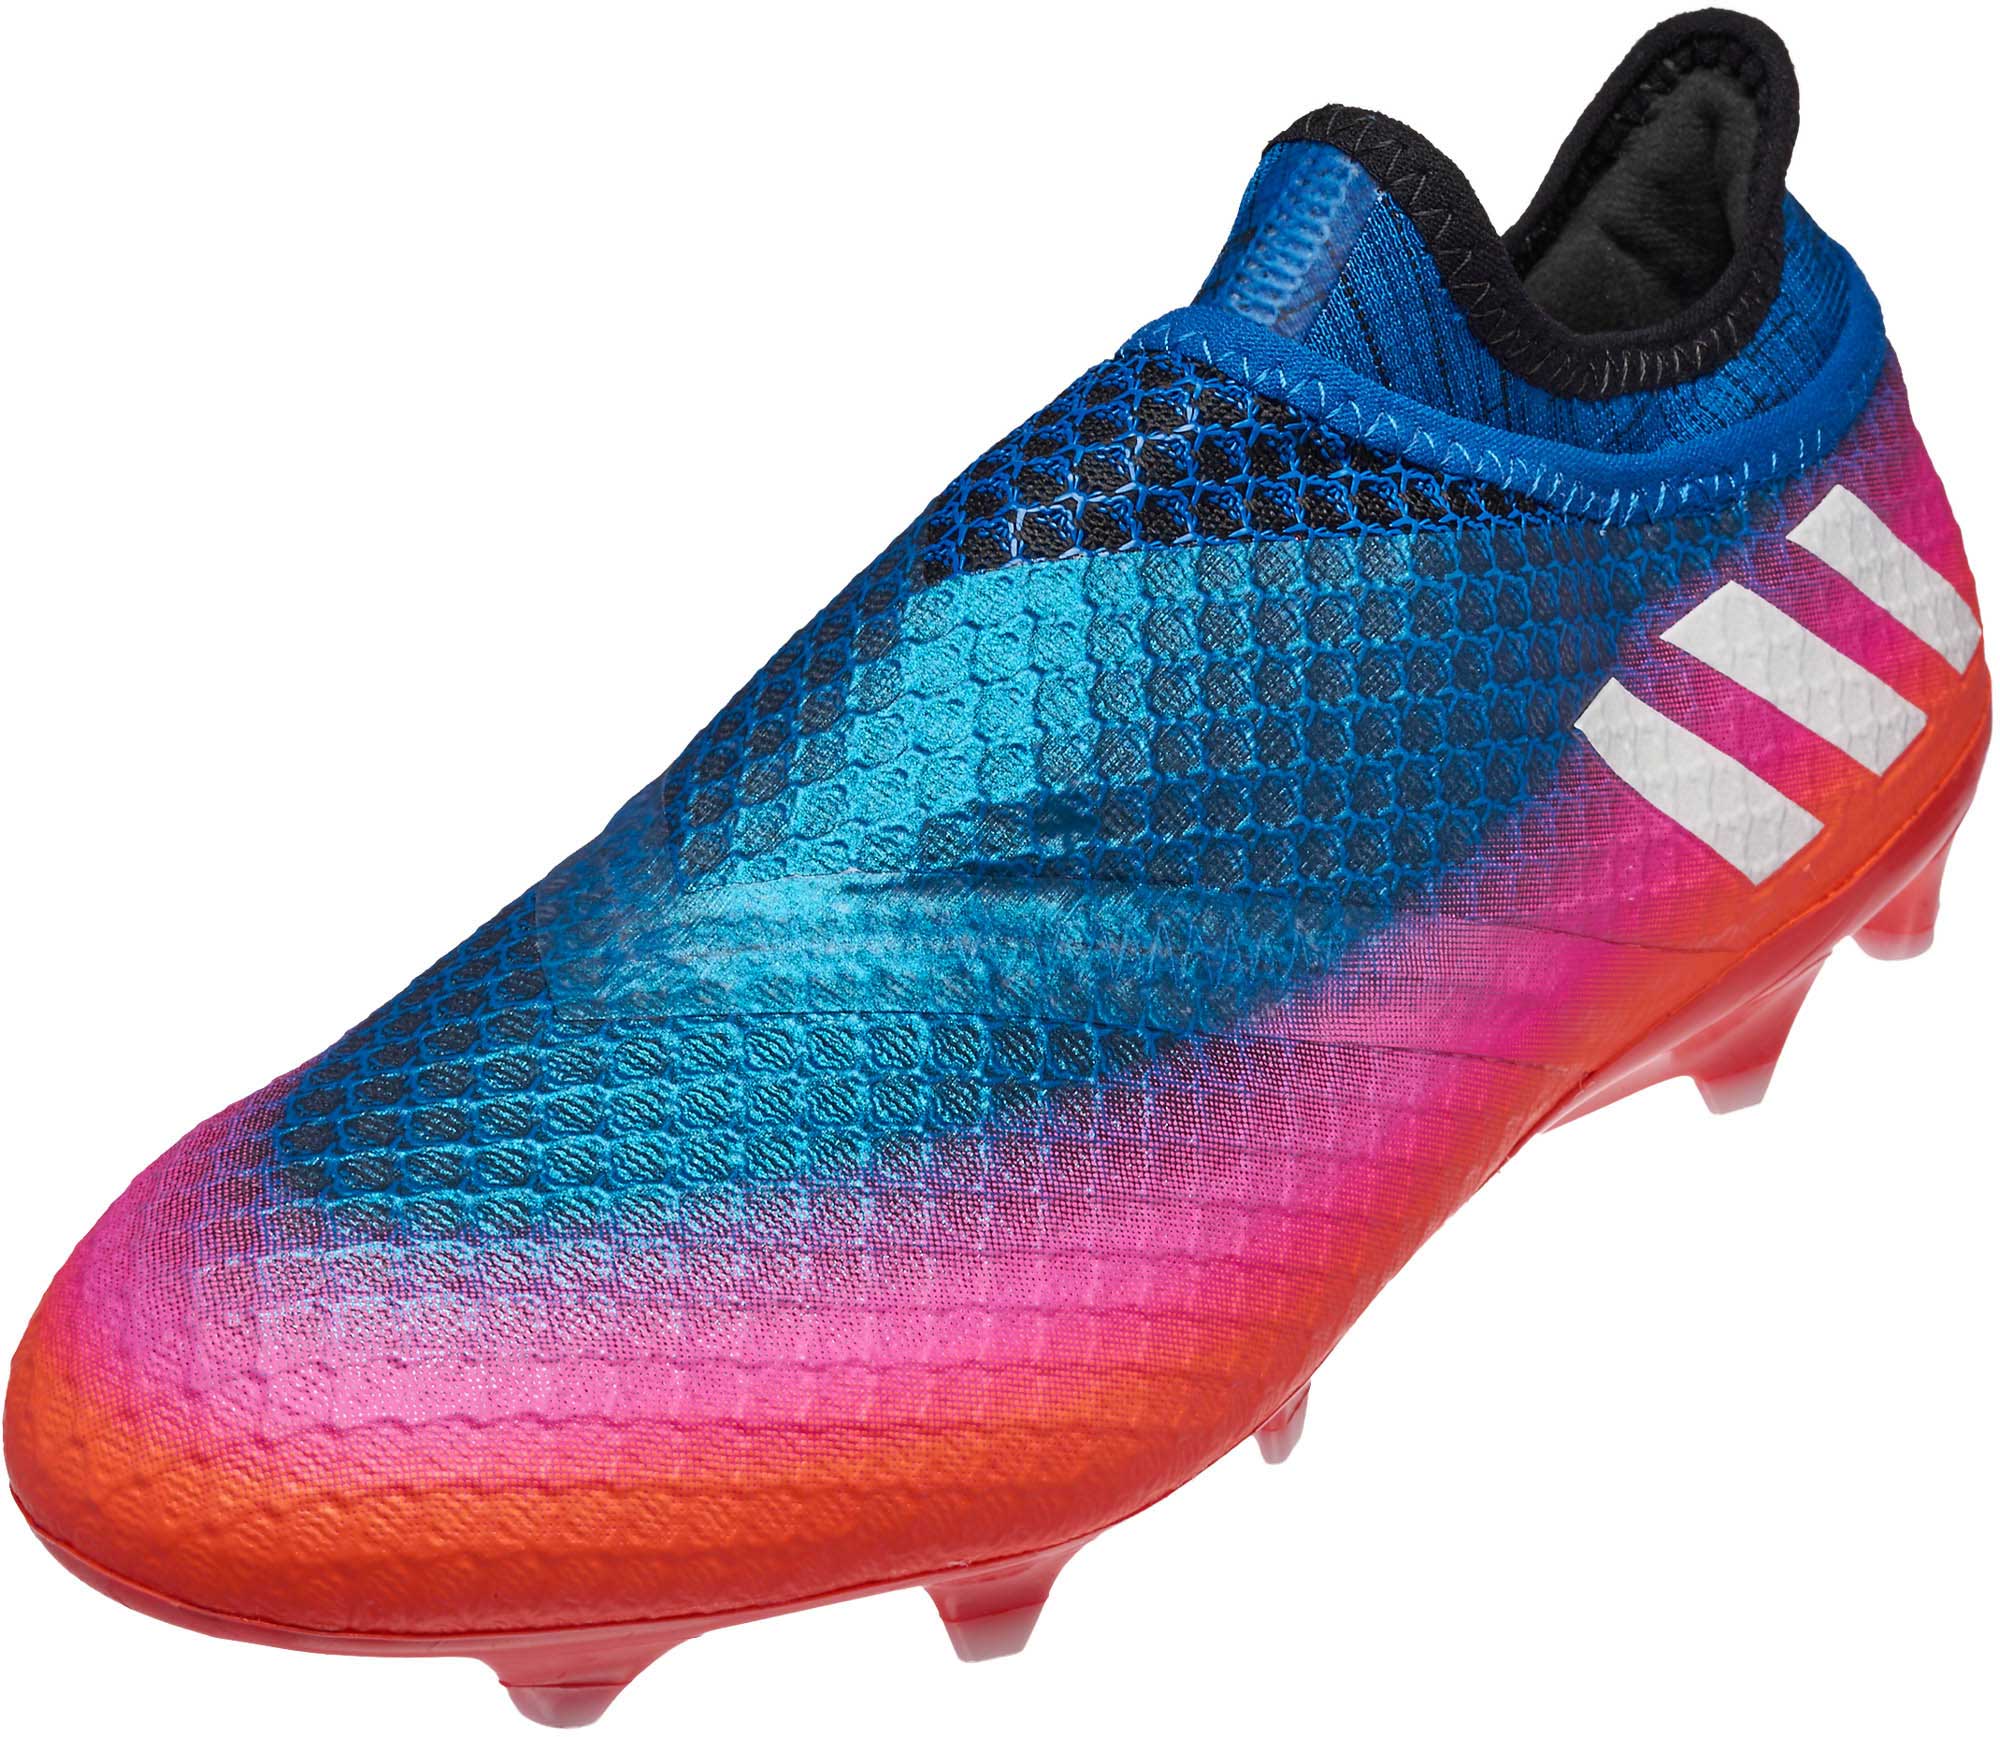 adidas messi soccer boots